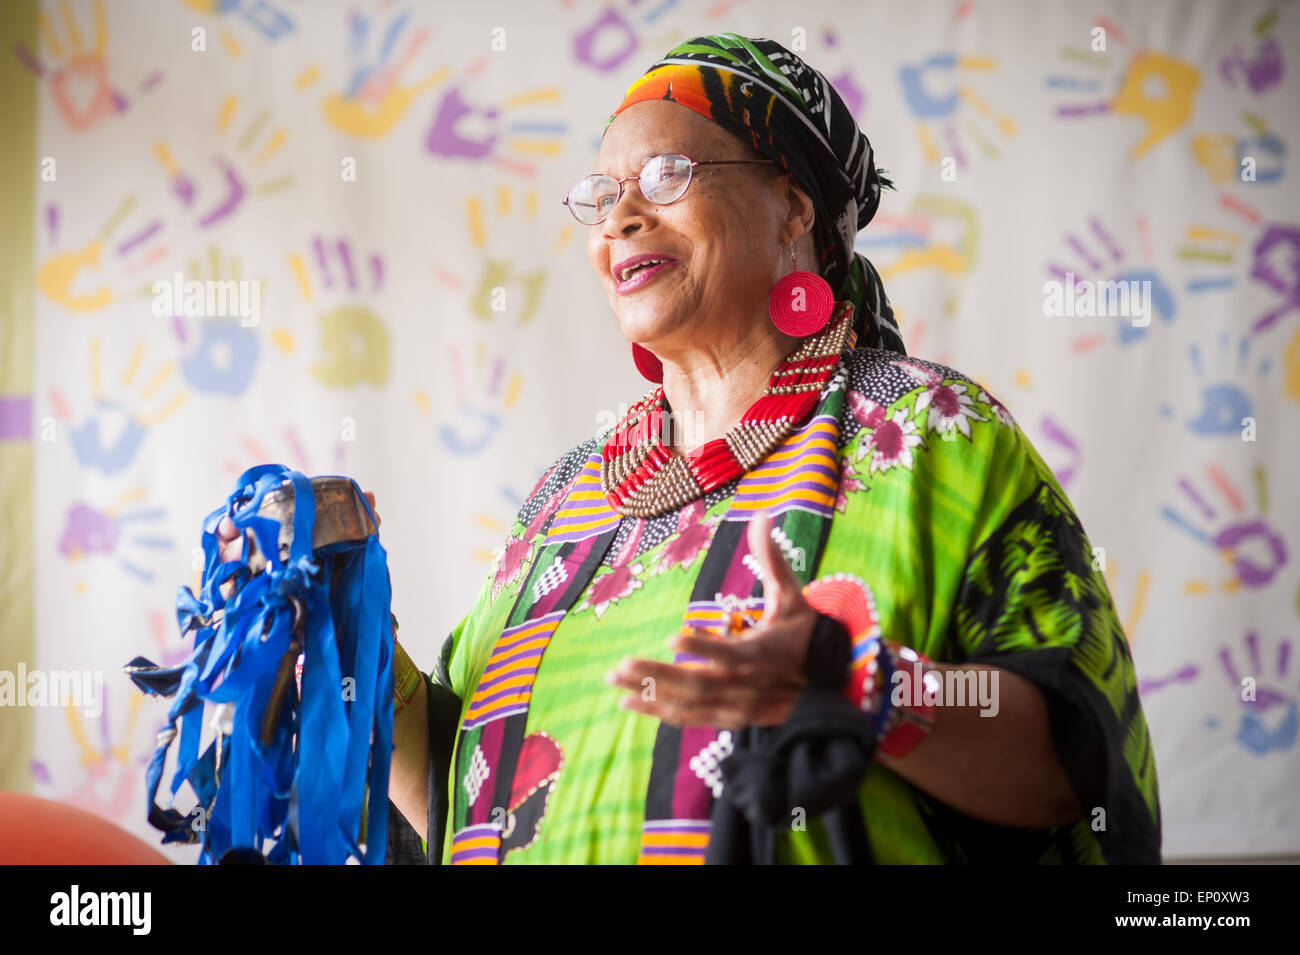 African American woman wearing colorful traditional clothes in Baltimore, Maryland Stock Photo